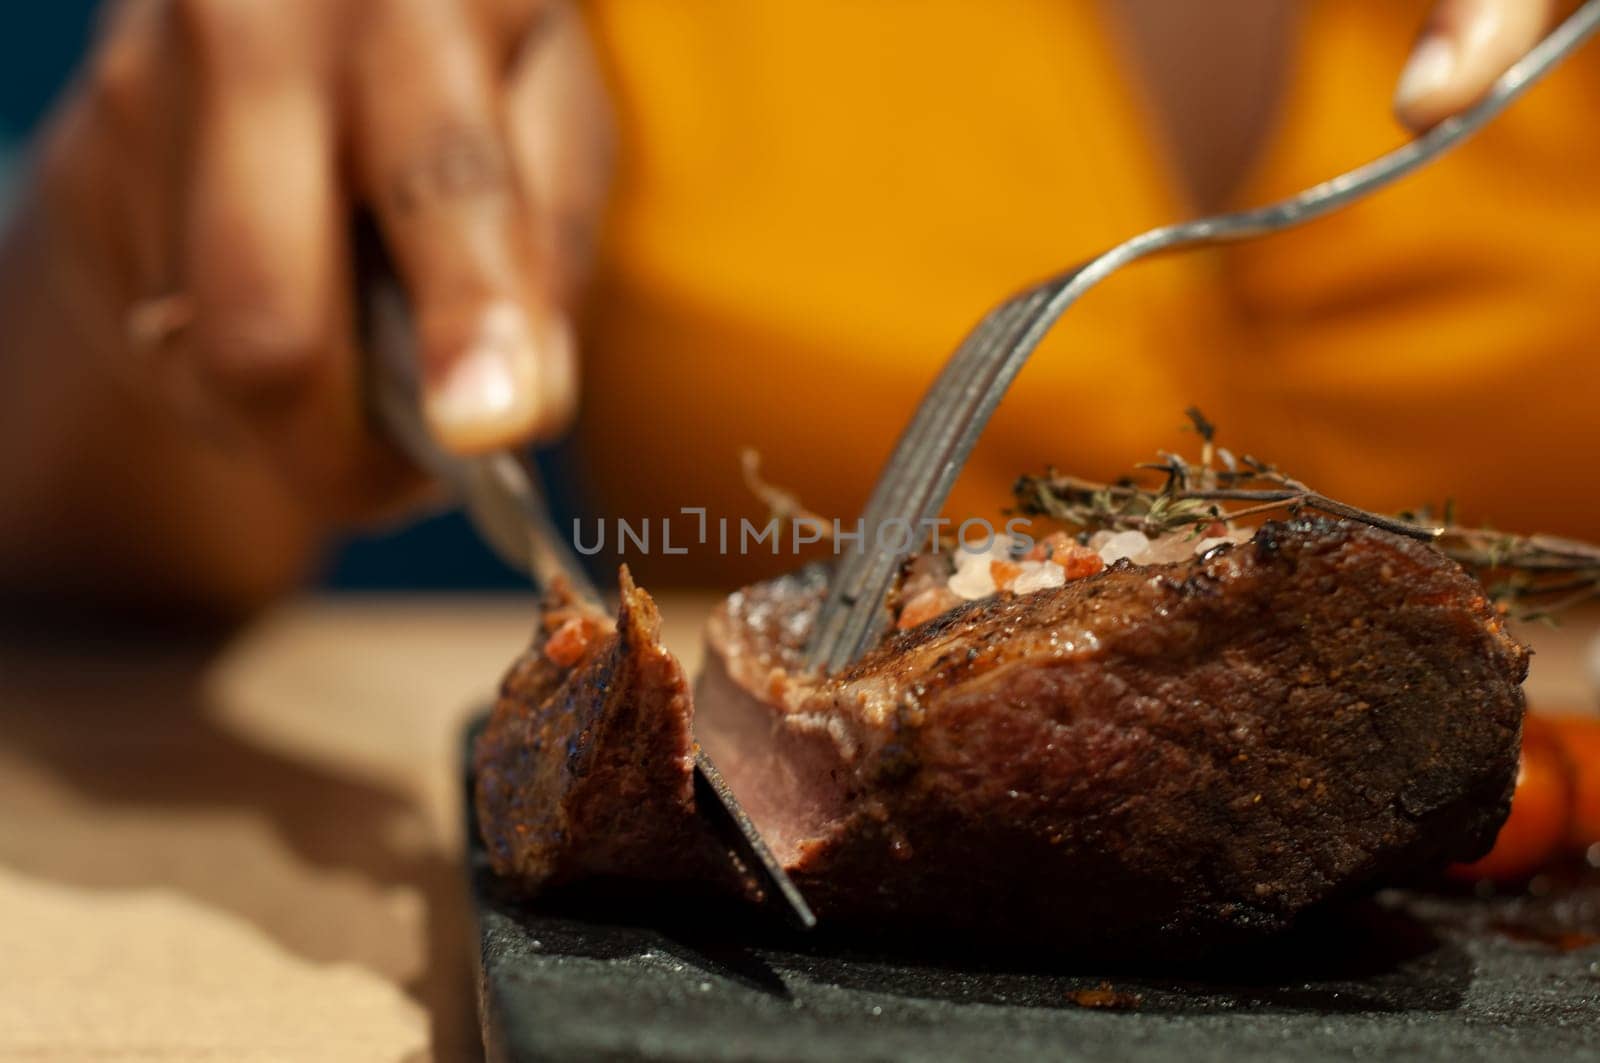 A close-up shot capturing the moment a person slices into a juicy, herb-topped steak on a hot stone plate, indicating a mealtime setting.